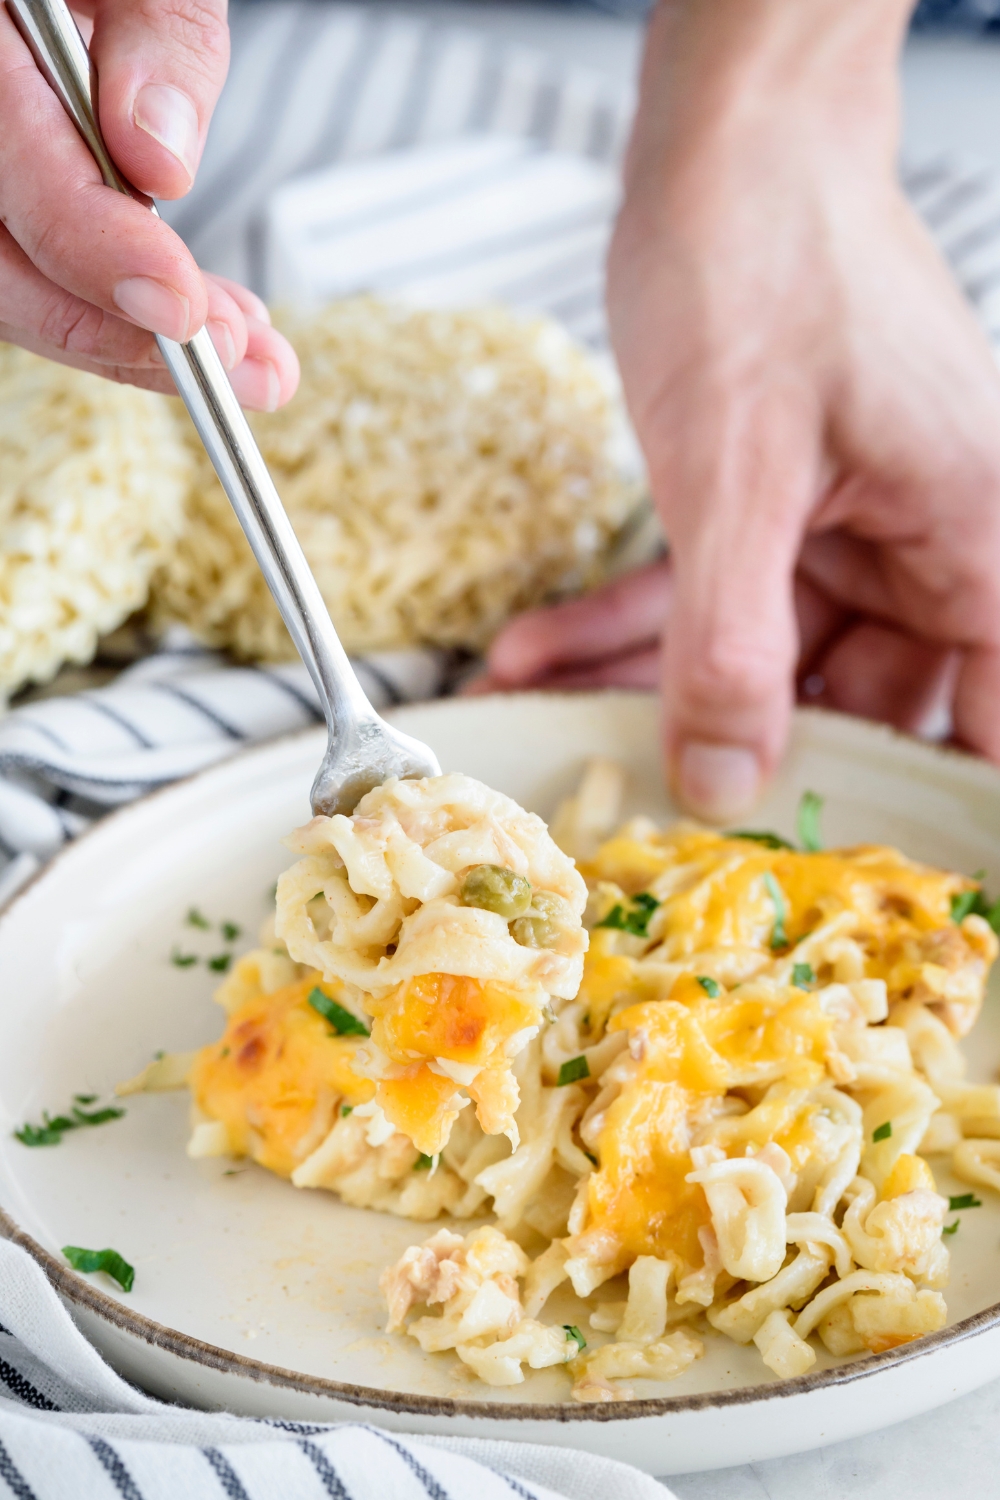 A hand using a fork to scoop a bite of cheesy tuna noodle casserole from a plate.